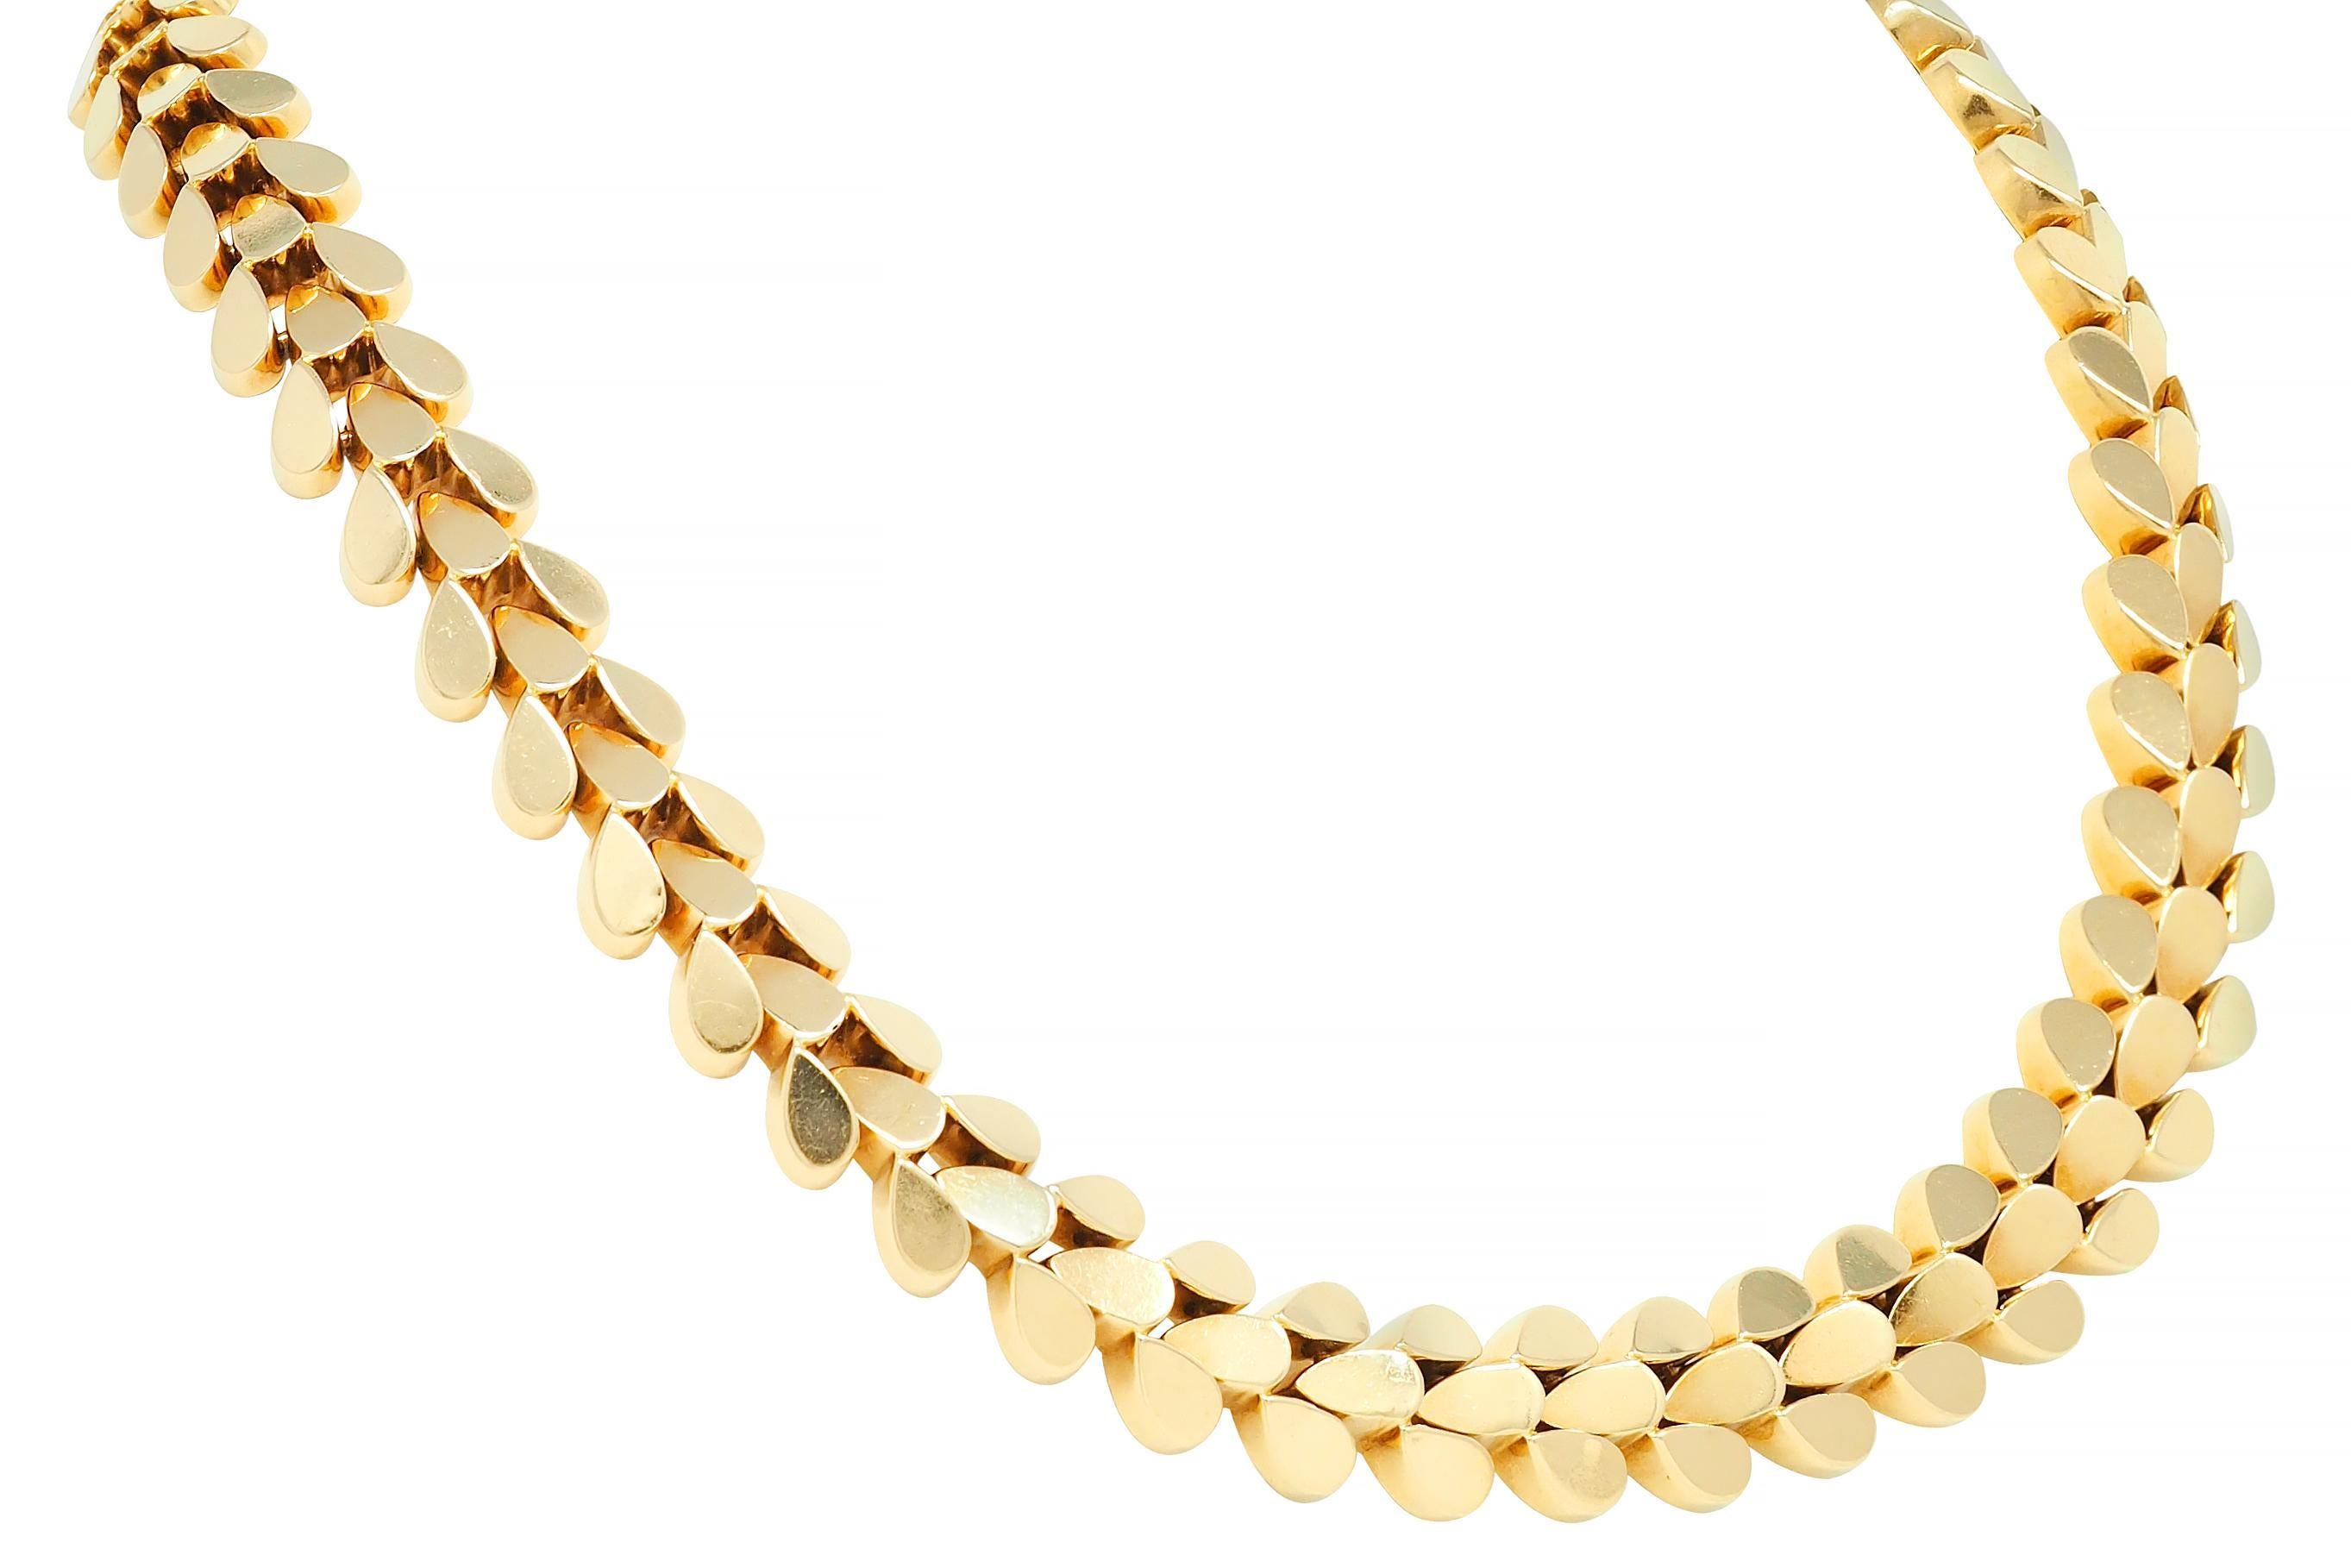 Contemporary Cartier 1970's 18 Karat Yellow Gold Foliate Link Vintage Collar Necklace For Sale